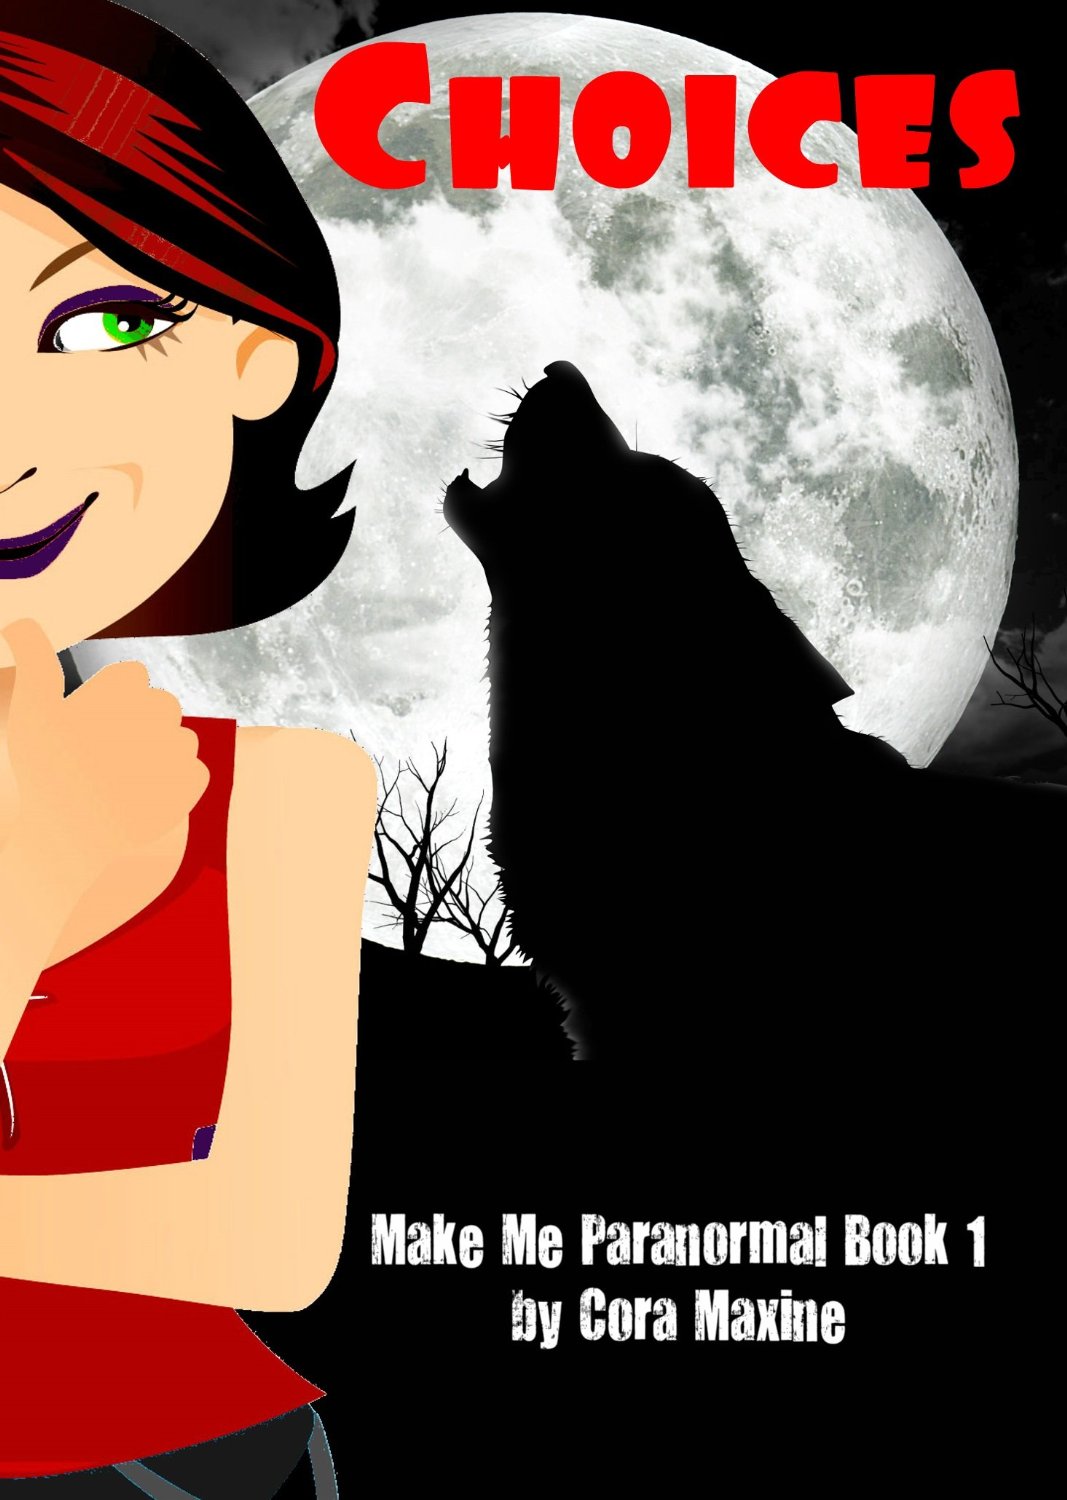 Choices: Make Me Paranormal by Cora Maxine